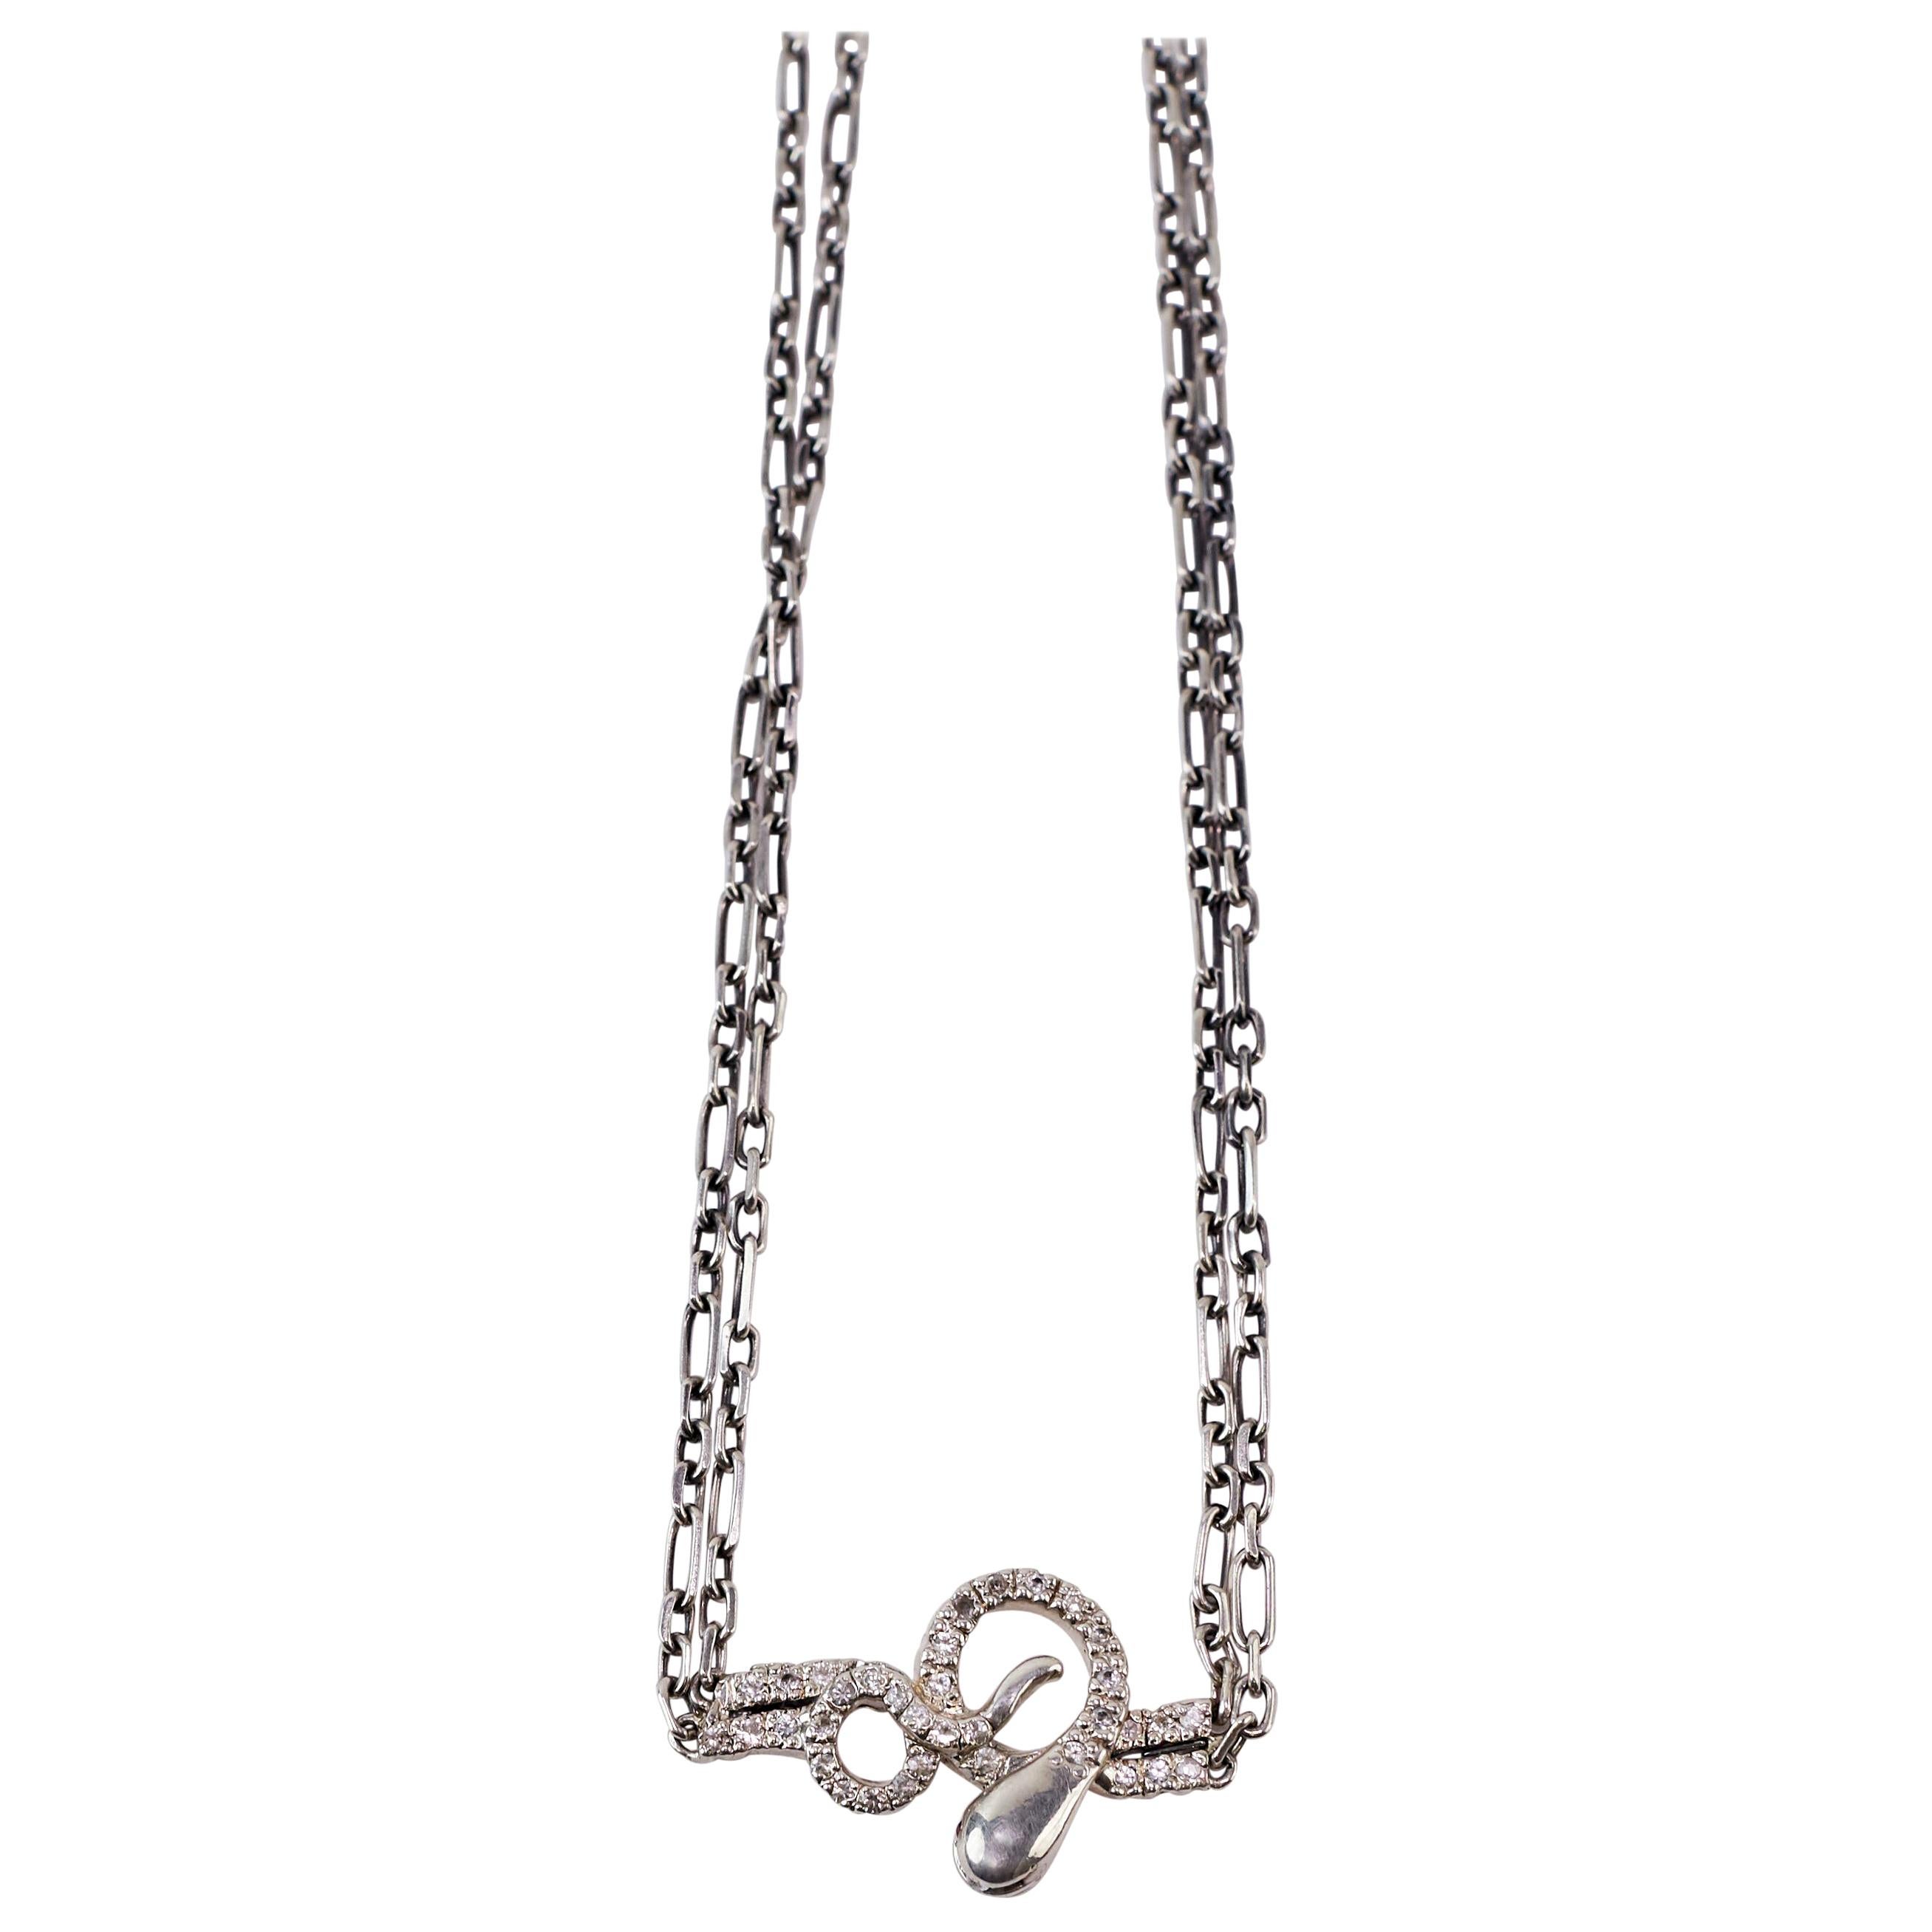 J DAUPHIN Chain Necklaces